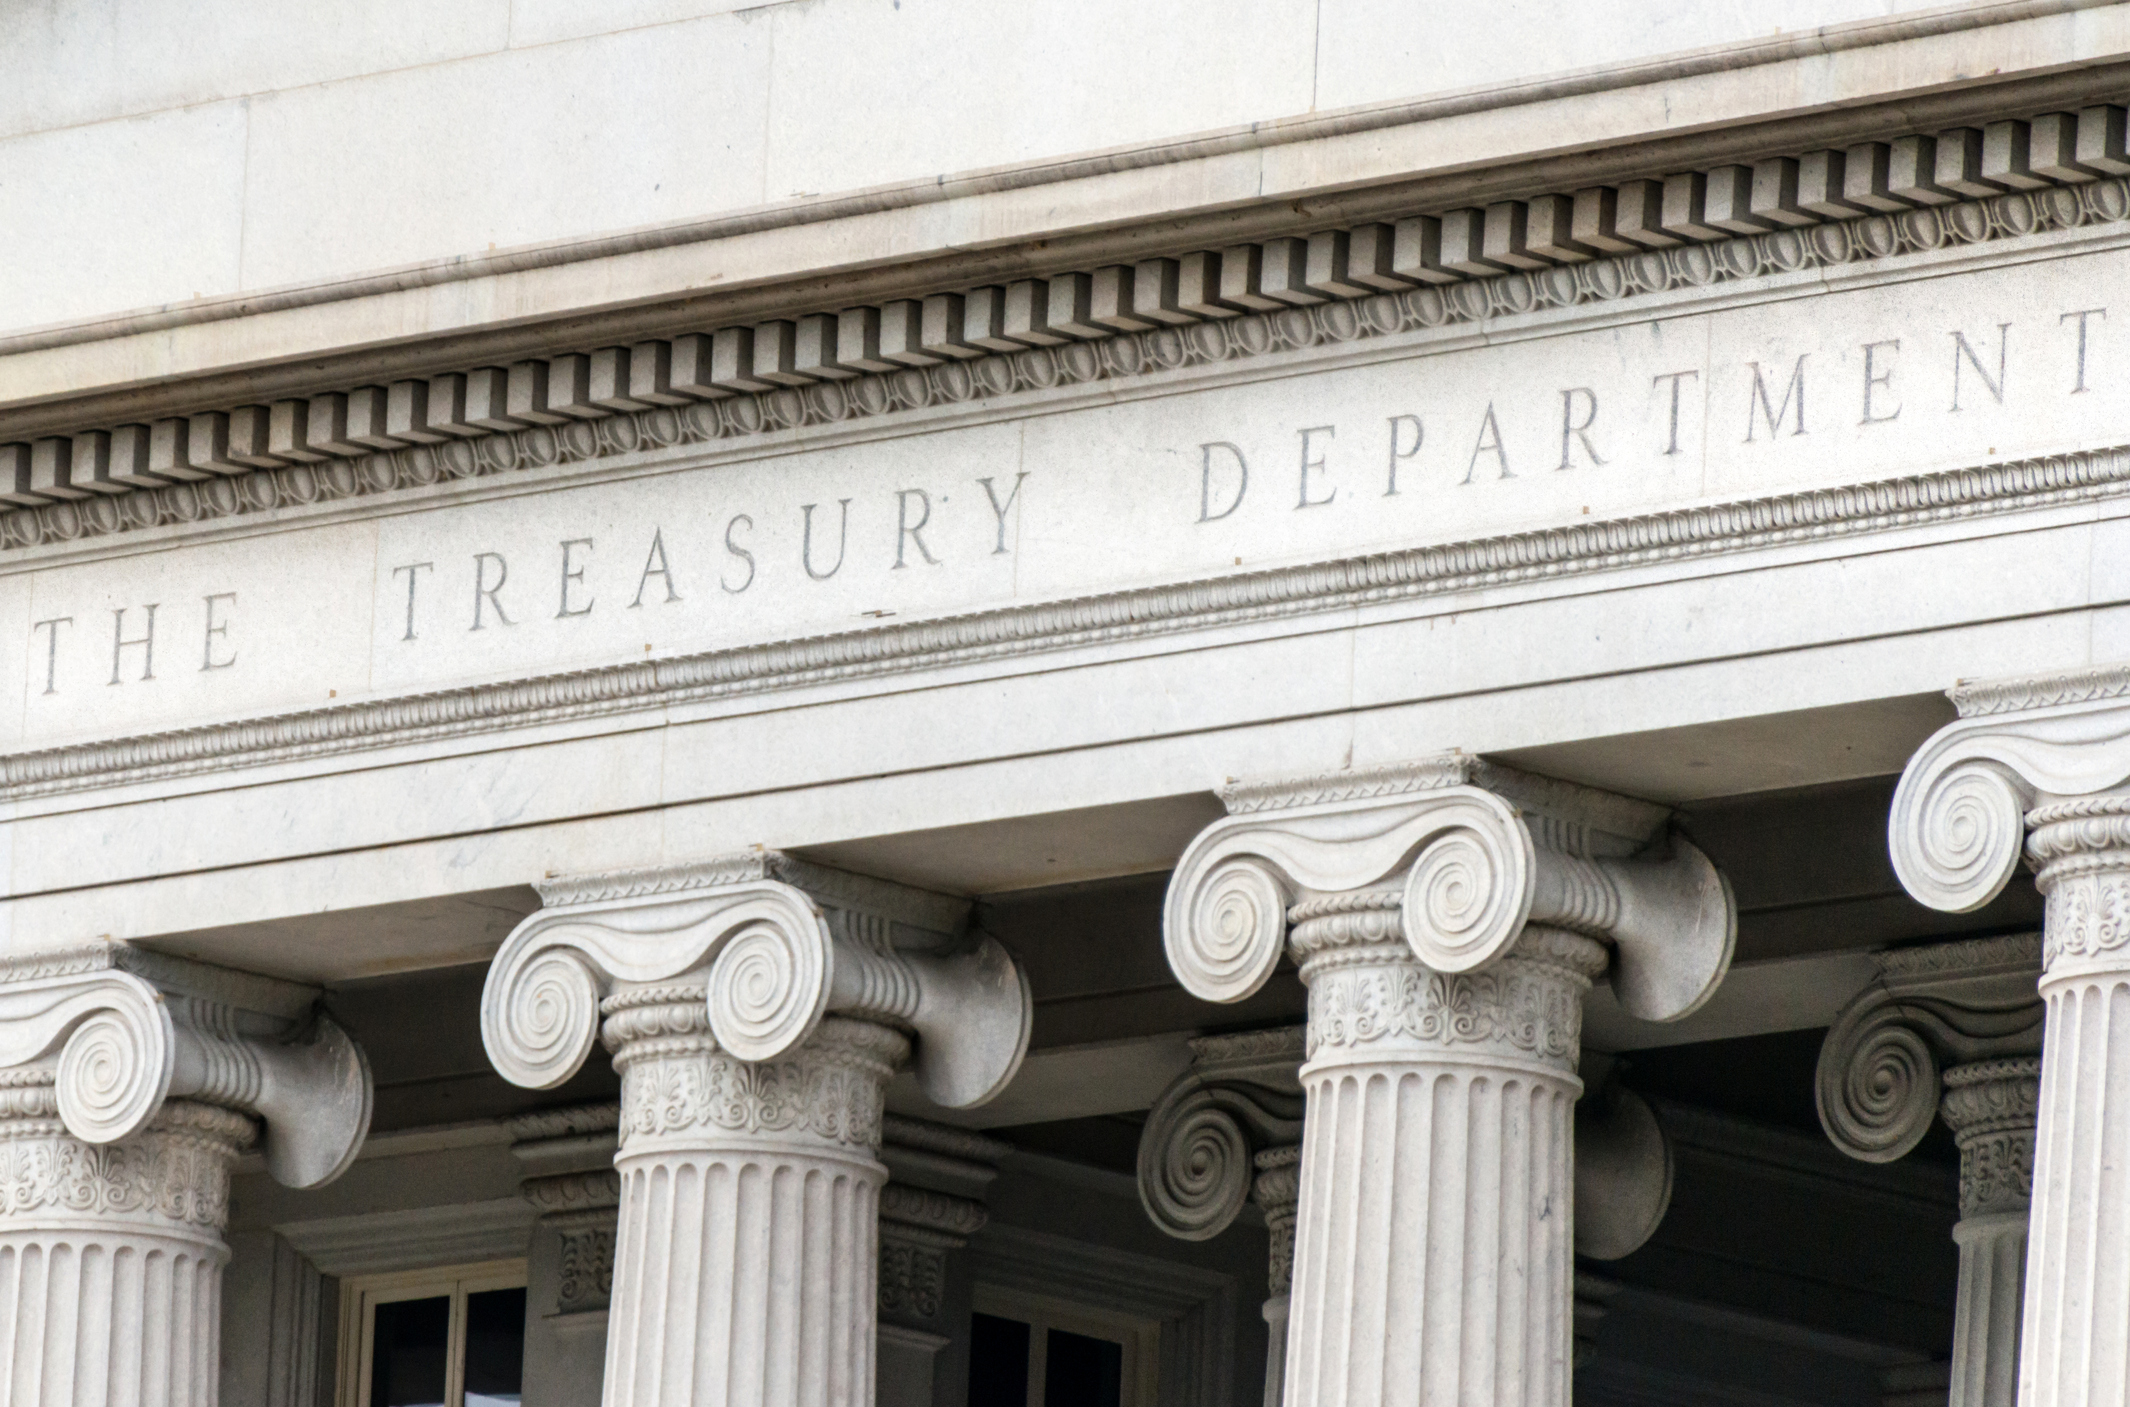 U.S. Treasury Department sign in Washington D.C. building facade. The U.S. budget deficit is set to widen to $1 trillion by fiscal year 2020, two years sooner than previously estimated, according to the Congressional Budget Office findings Wednesday. (Juanmonino—Getty Images/iStockphoto)